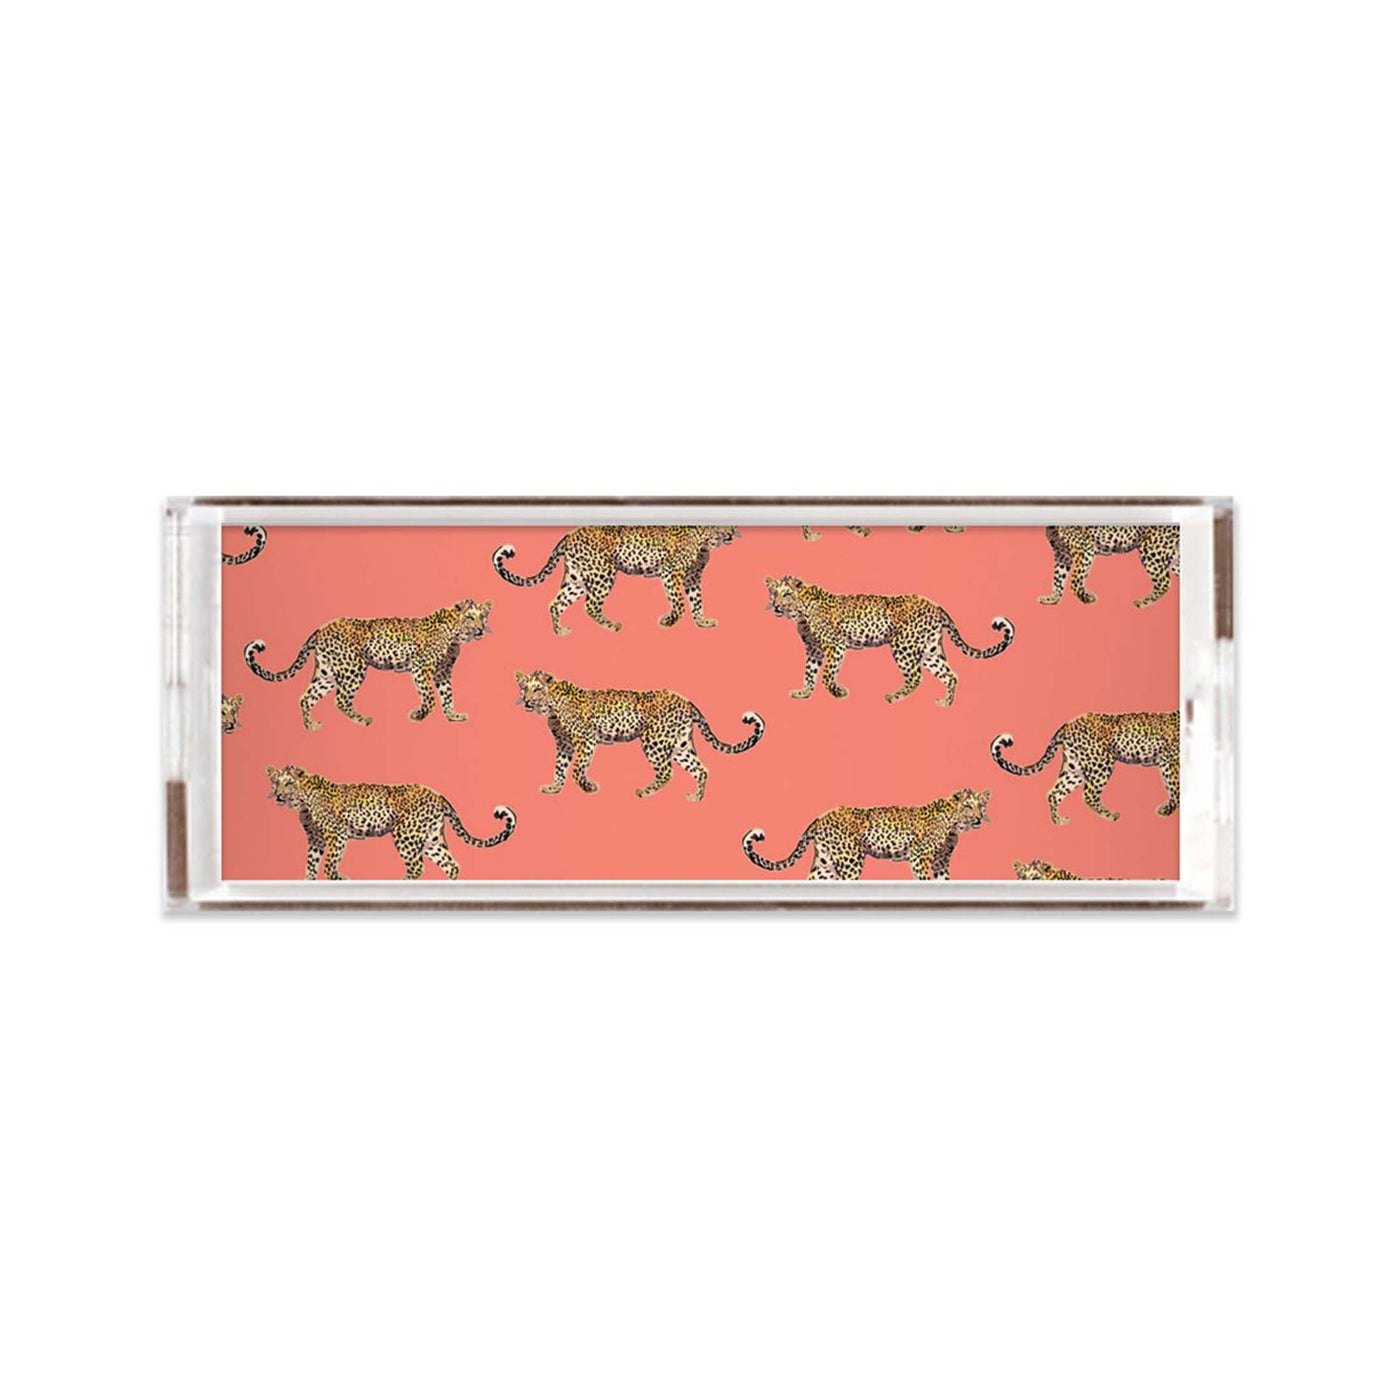 Lucite Trays Coral / 11x4 Cheetahs Lucite Tray Katie Kime